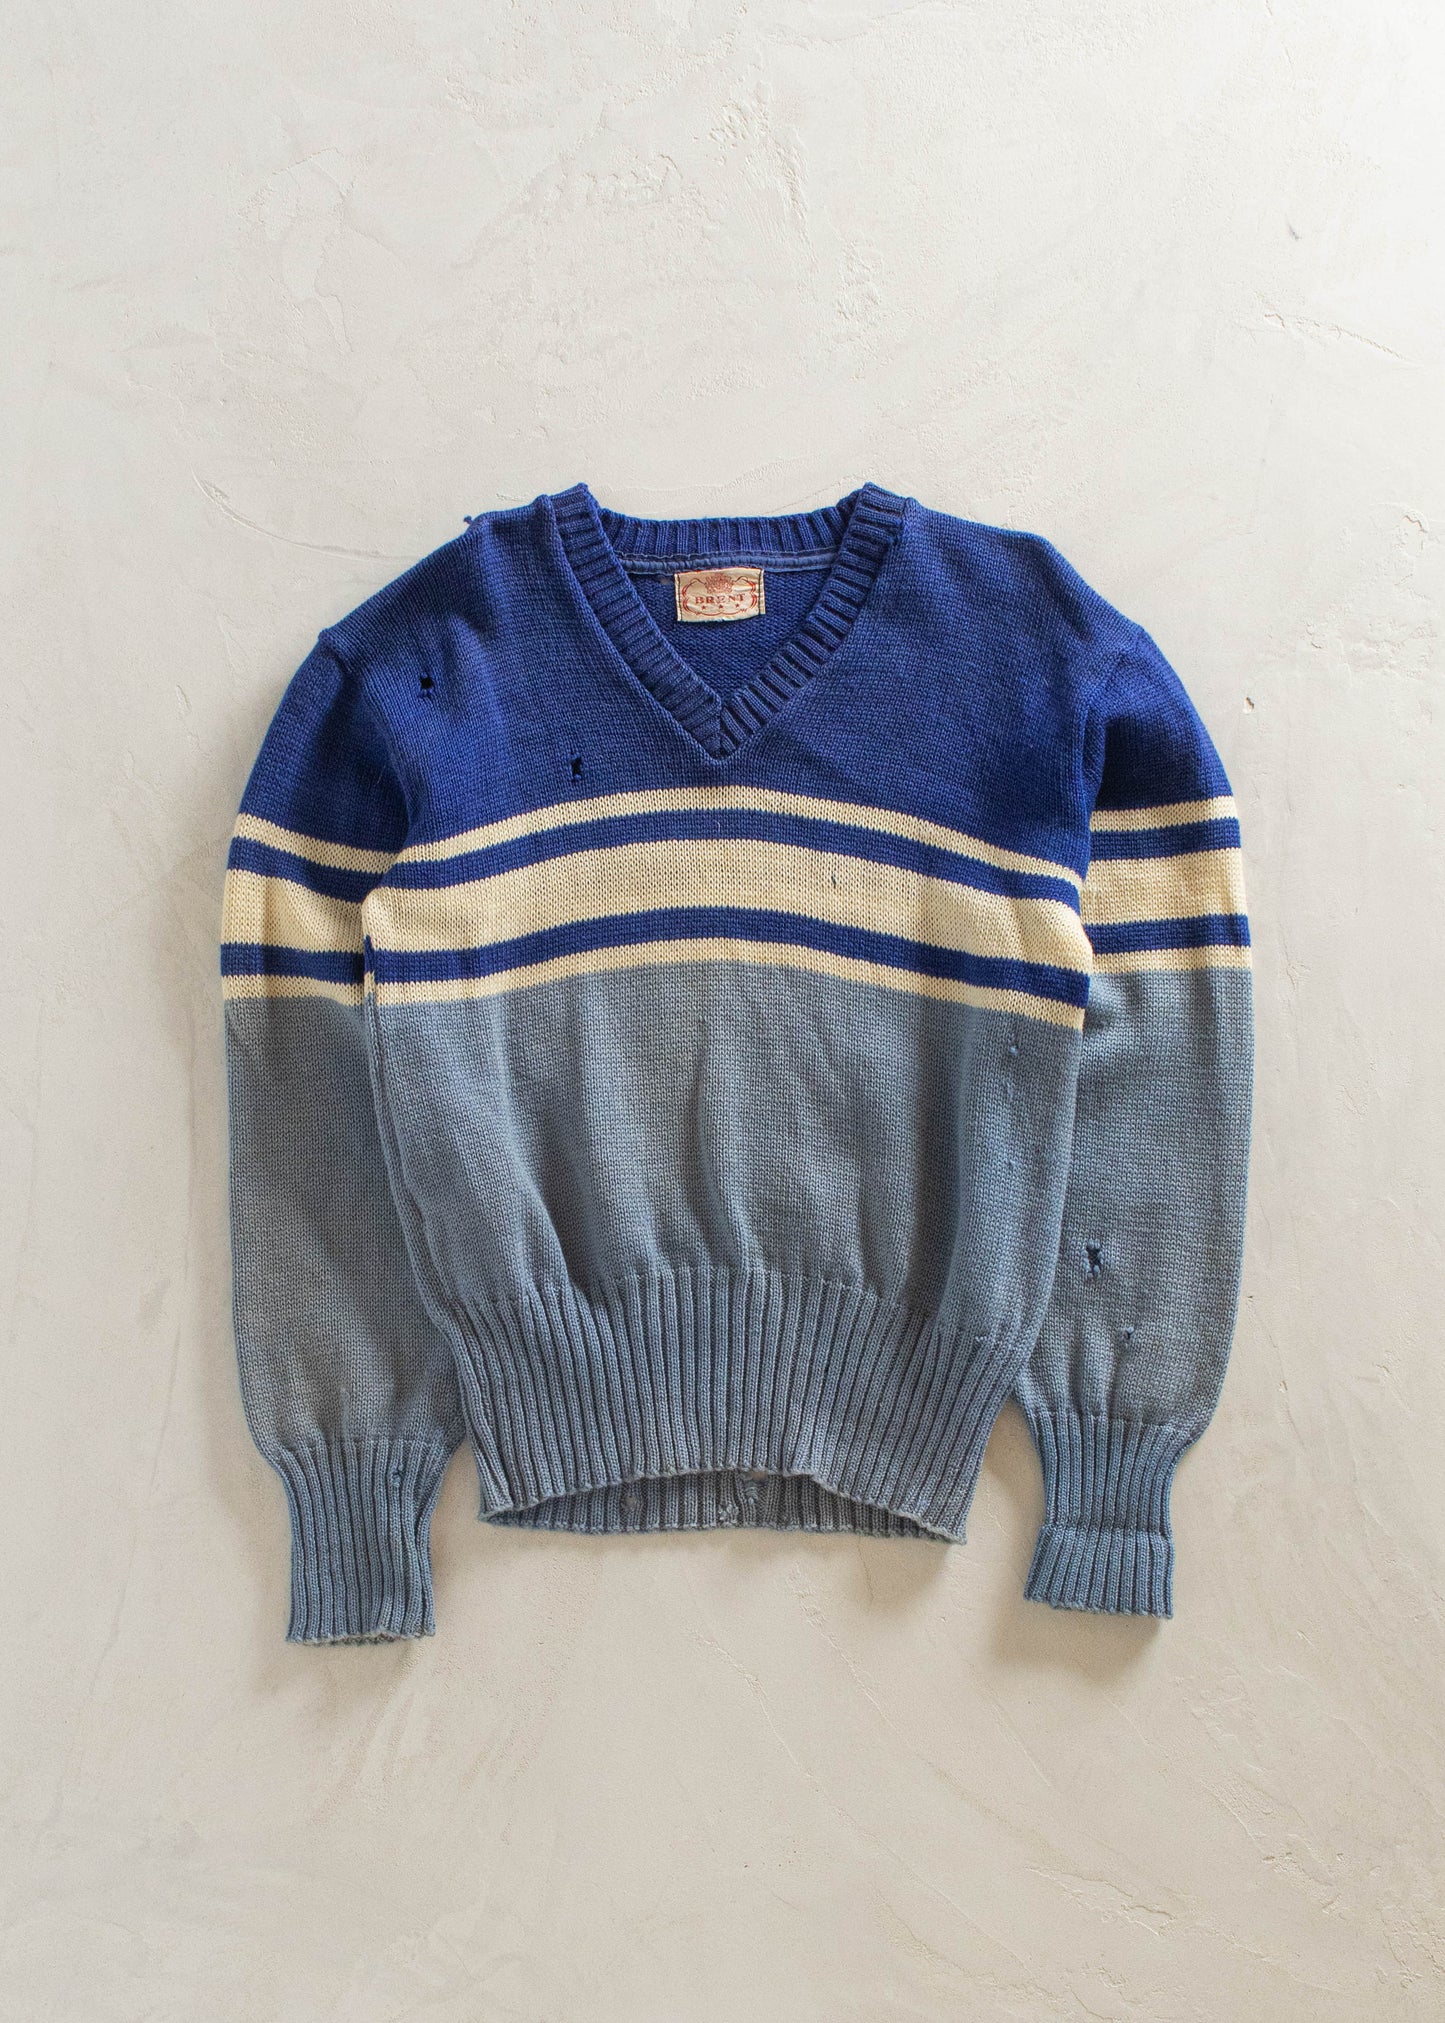 1950s Brent Wool Pullover Sweater Size S/M